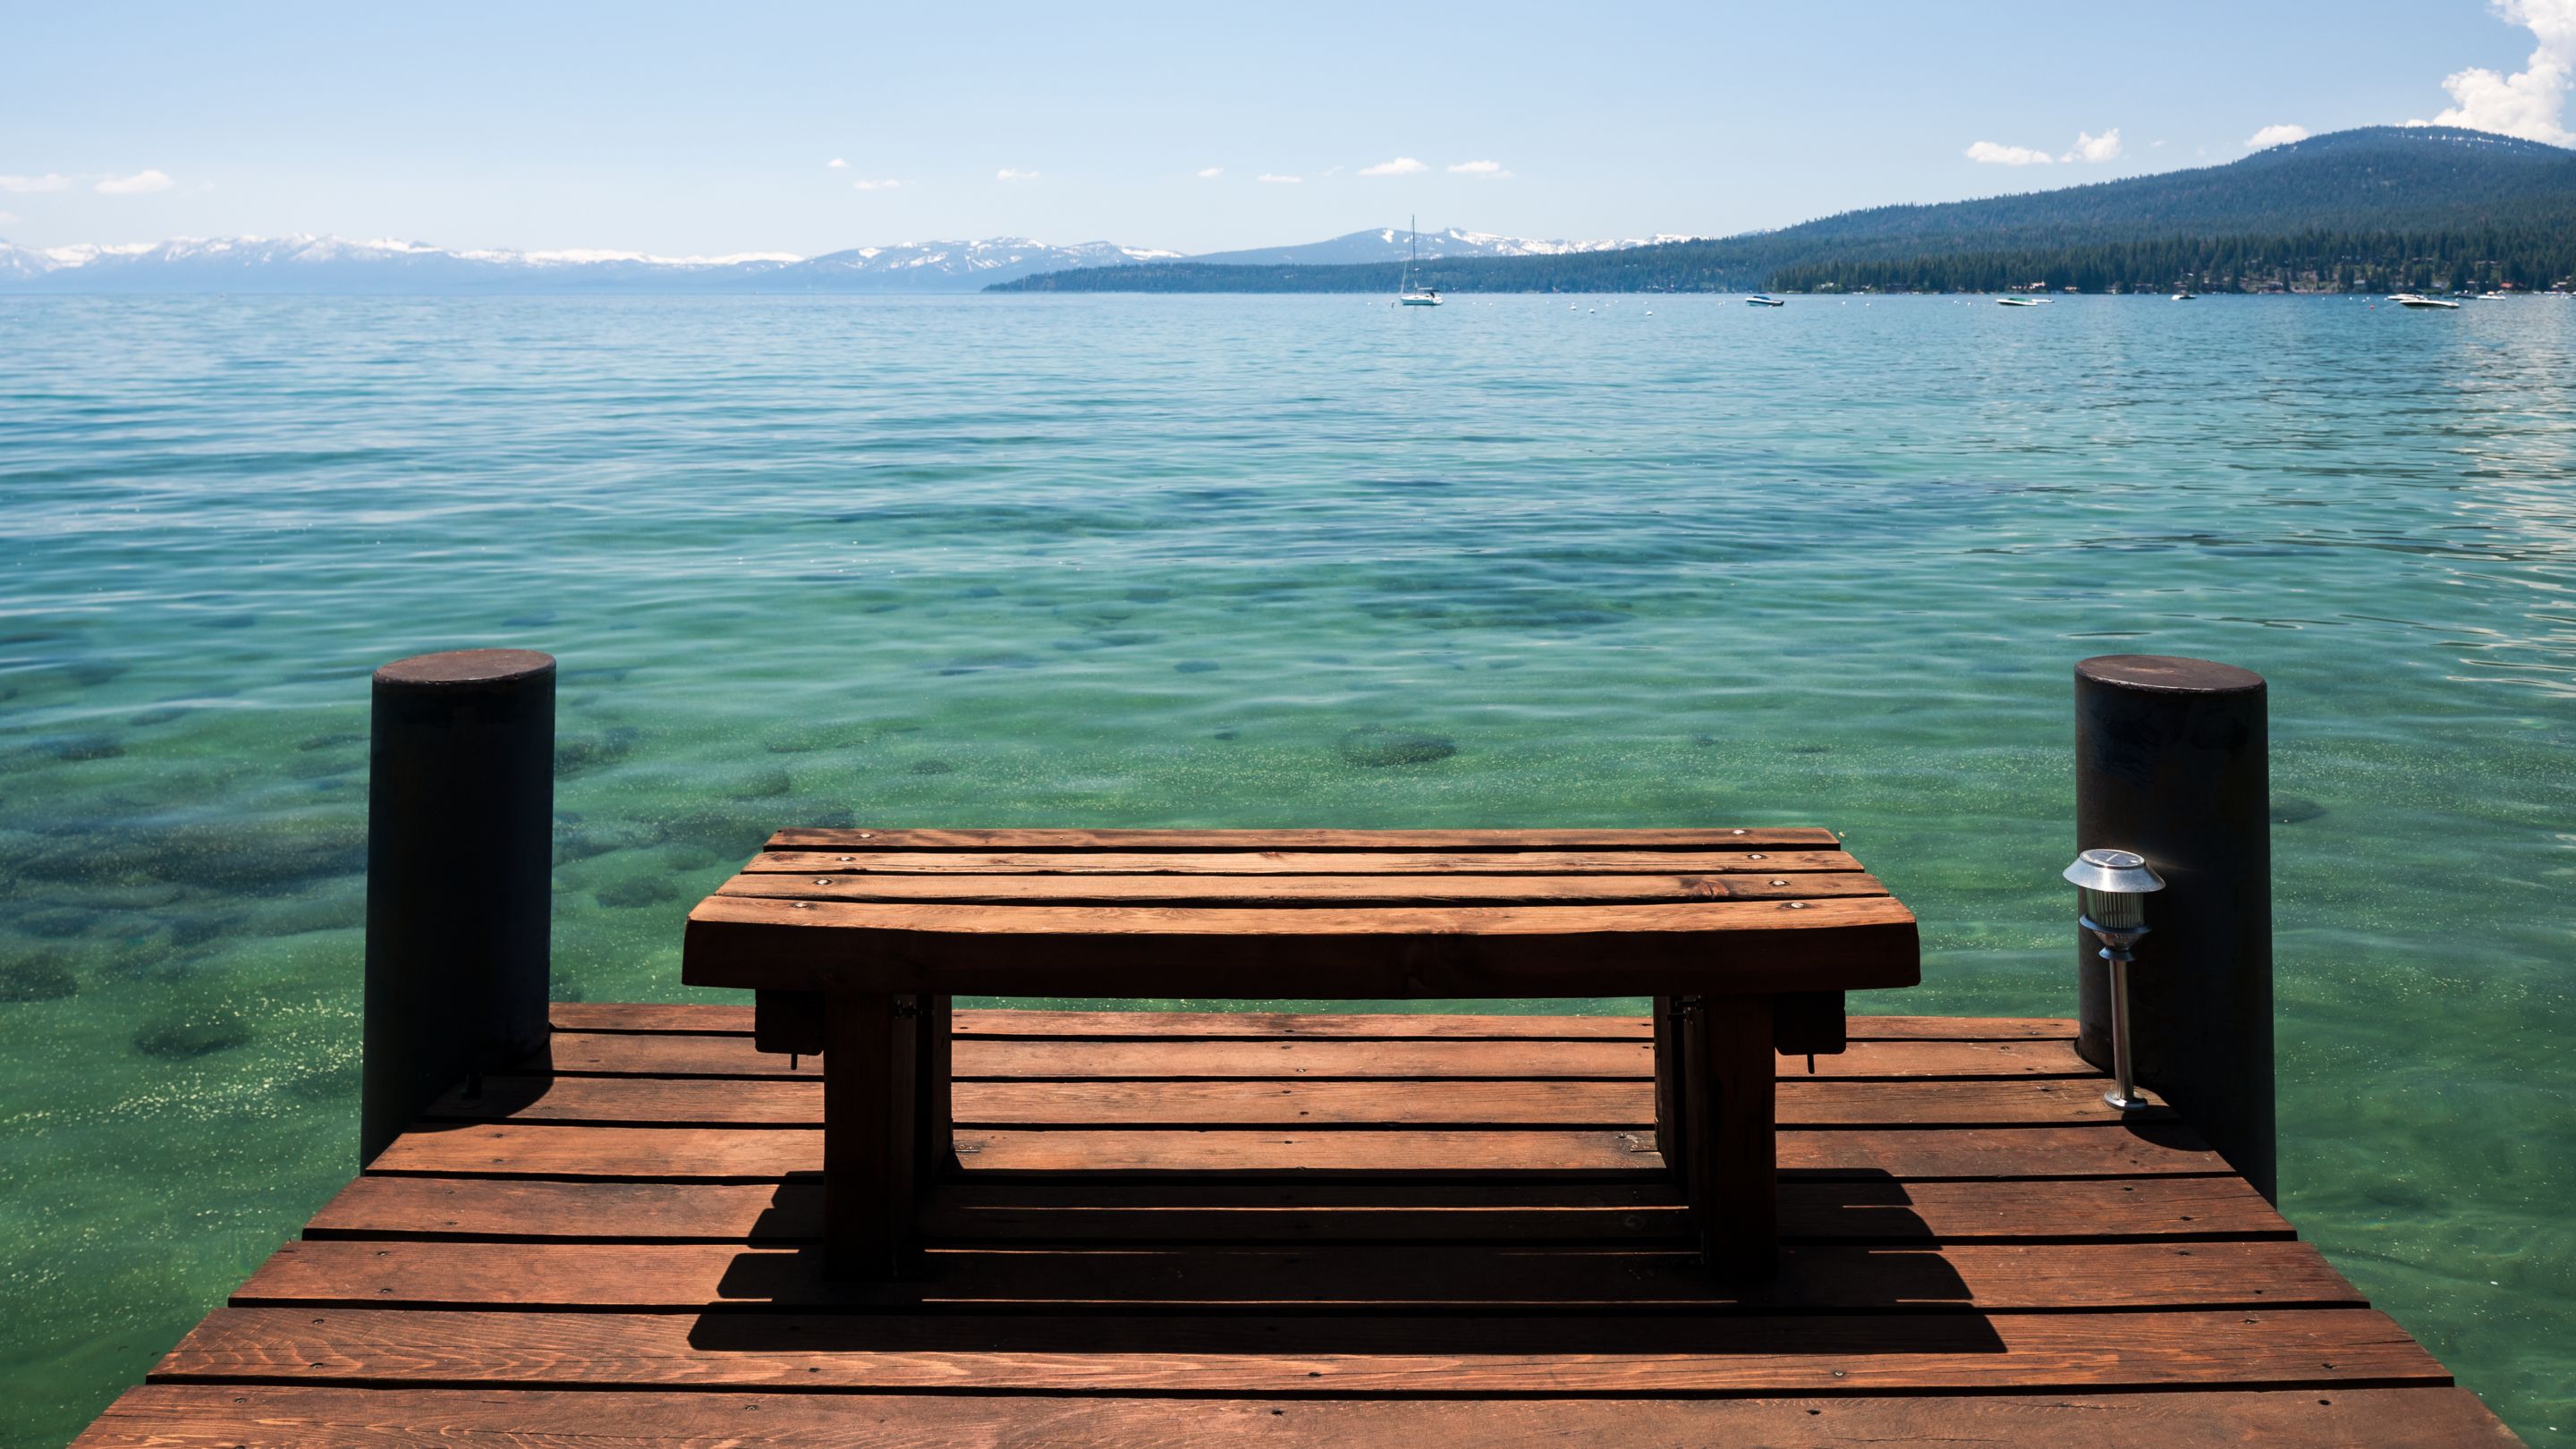 A wooden bench on a pier overlooking a lake